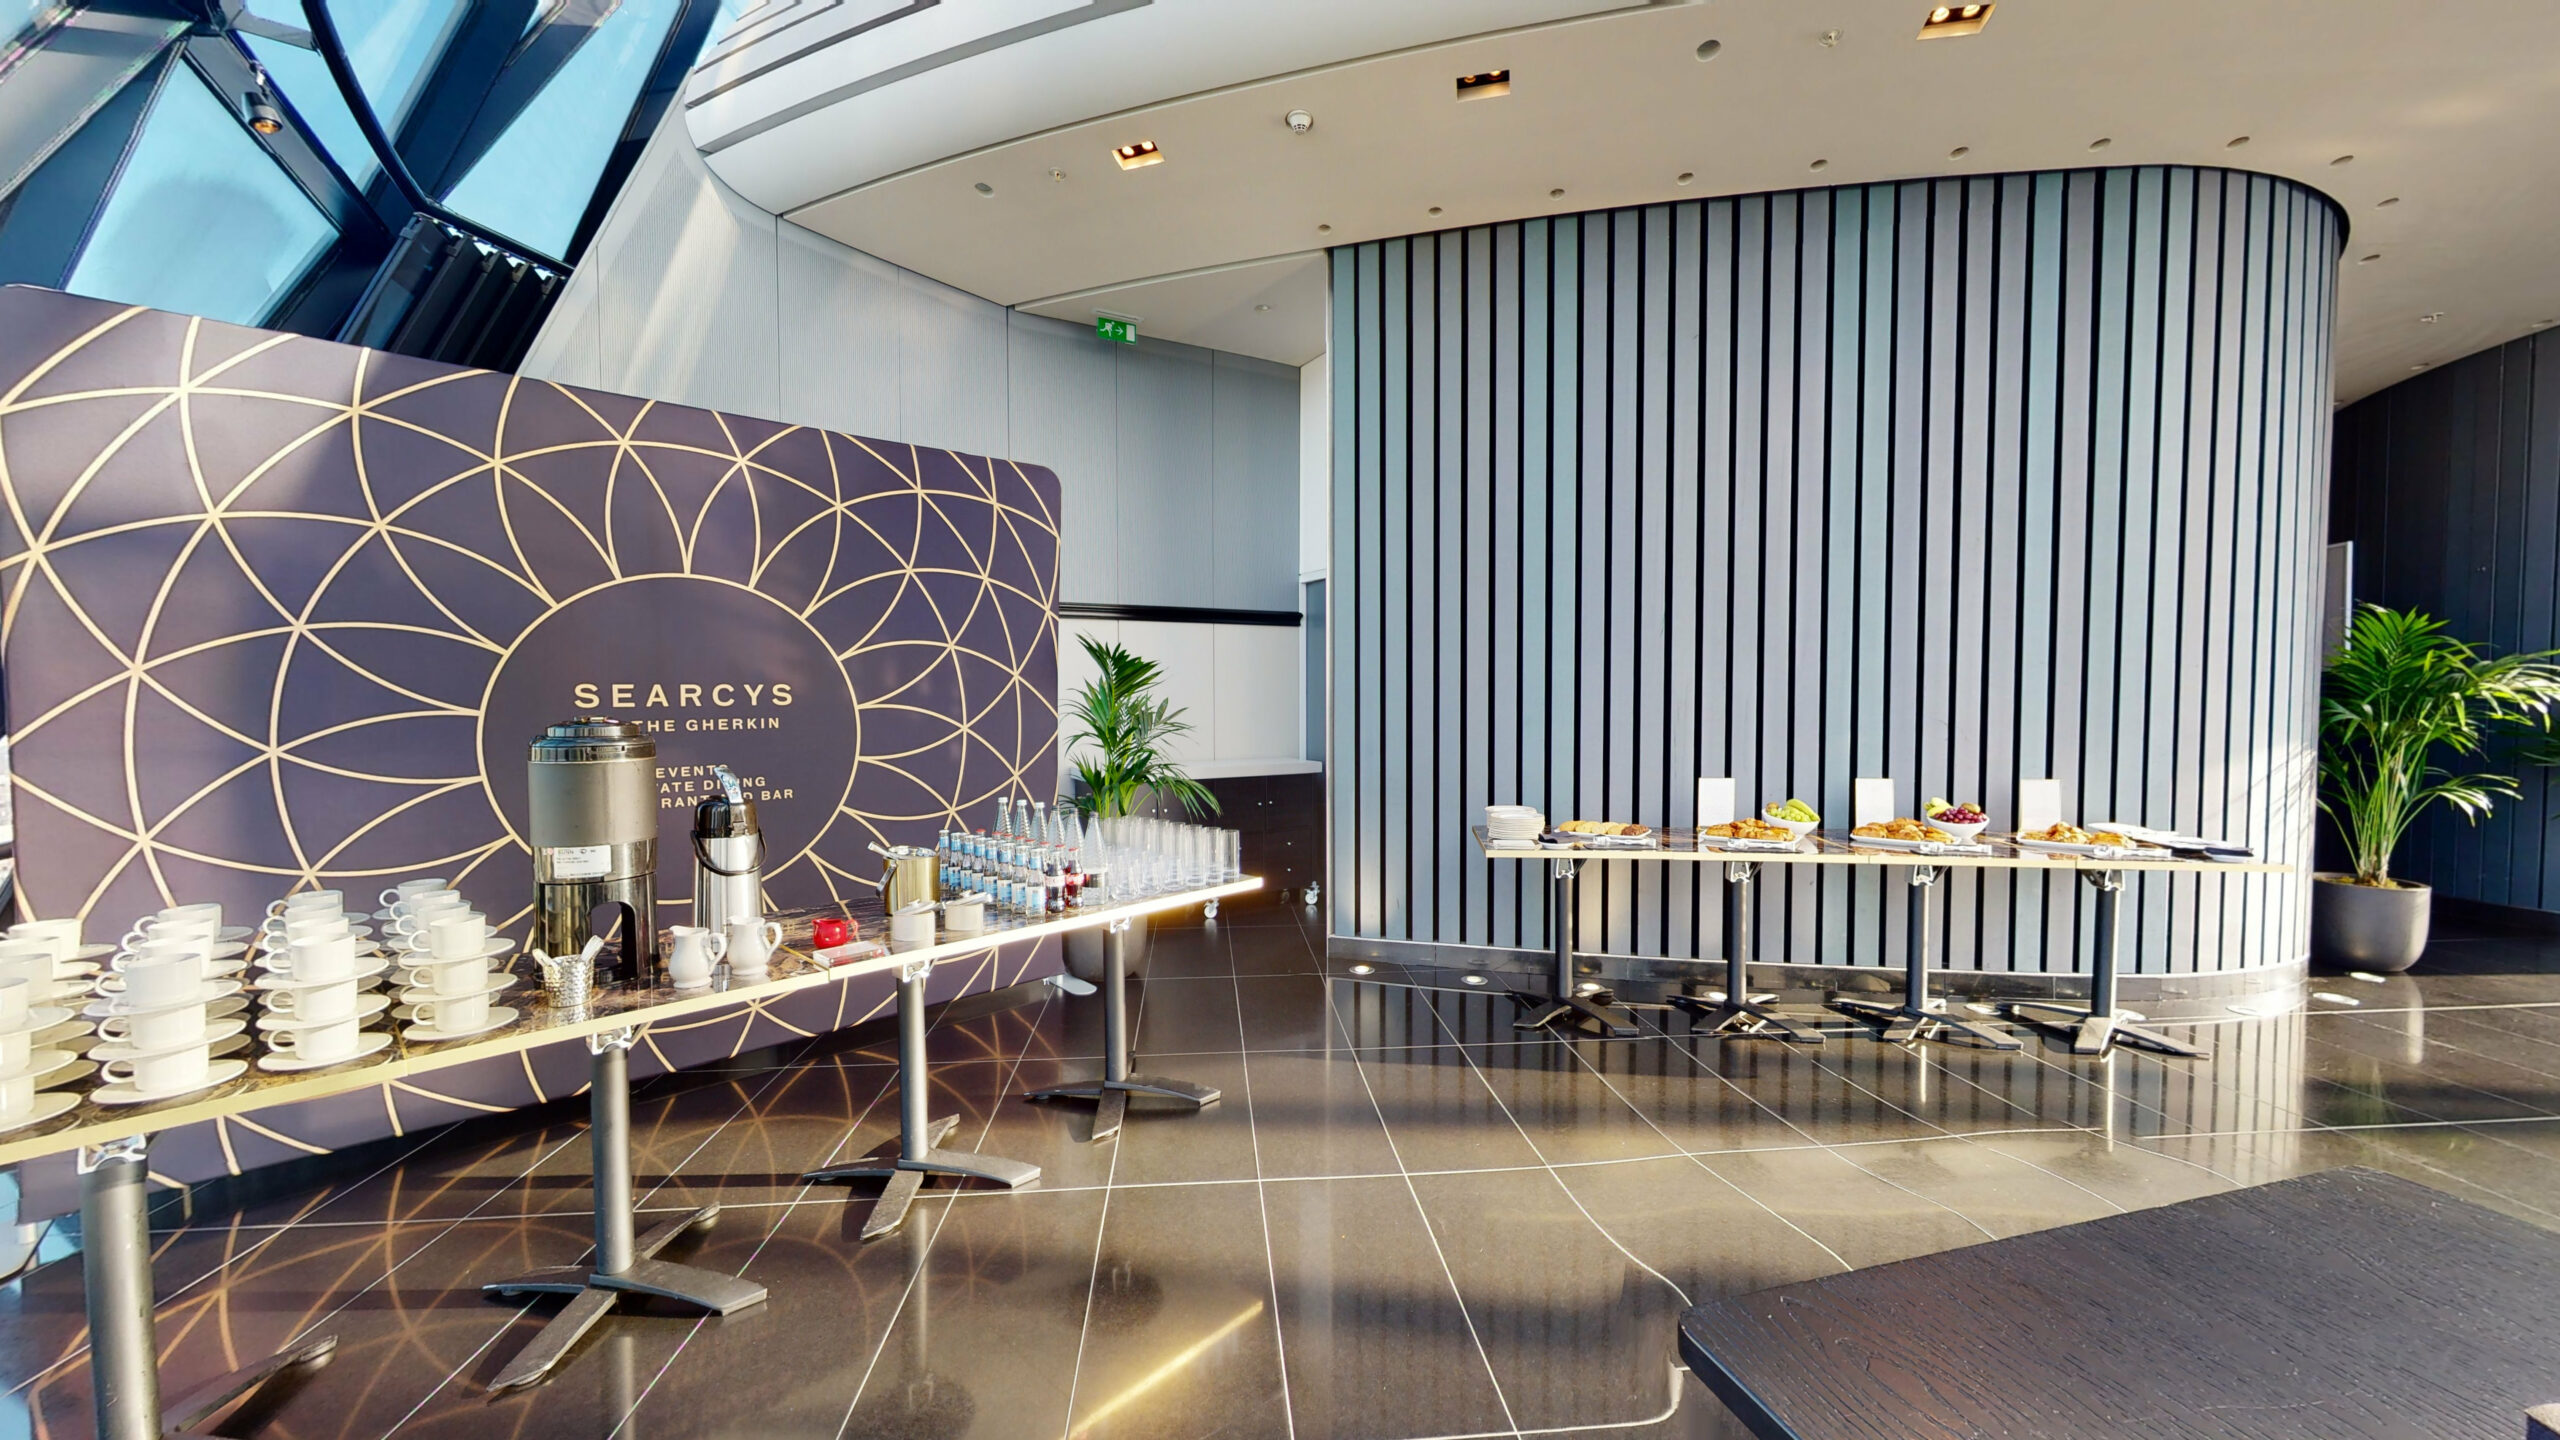 Business Breakfasts - Searcys at the Gherkin